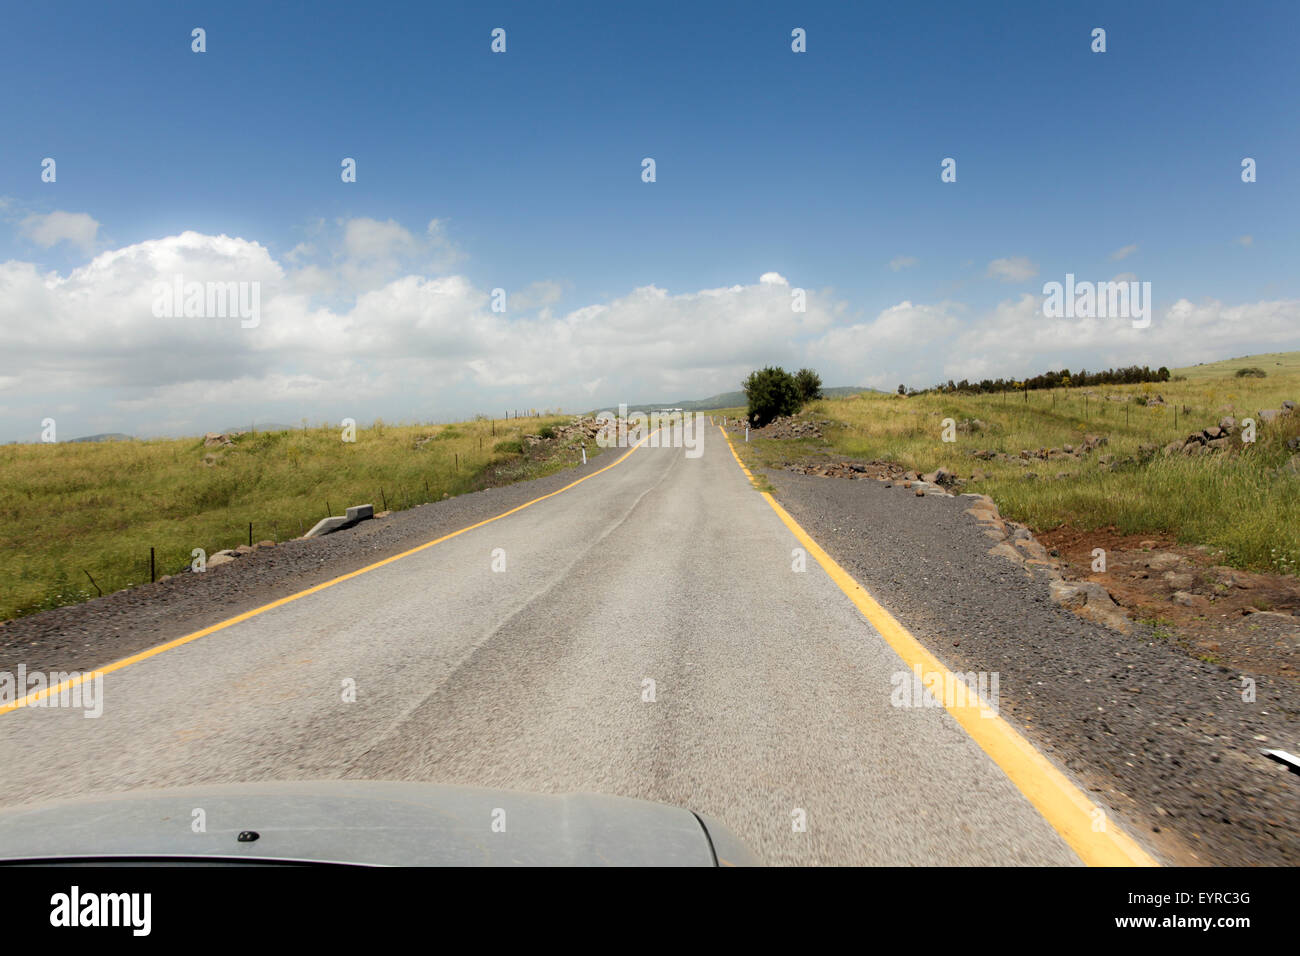 Straight road to vanishing point on the horizon with no traffic. Photographed in the Golan Heights, Israel Stock Photo